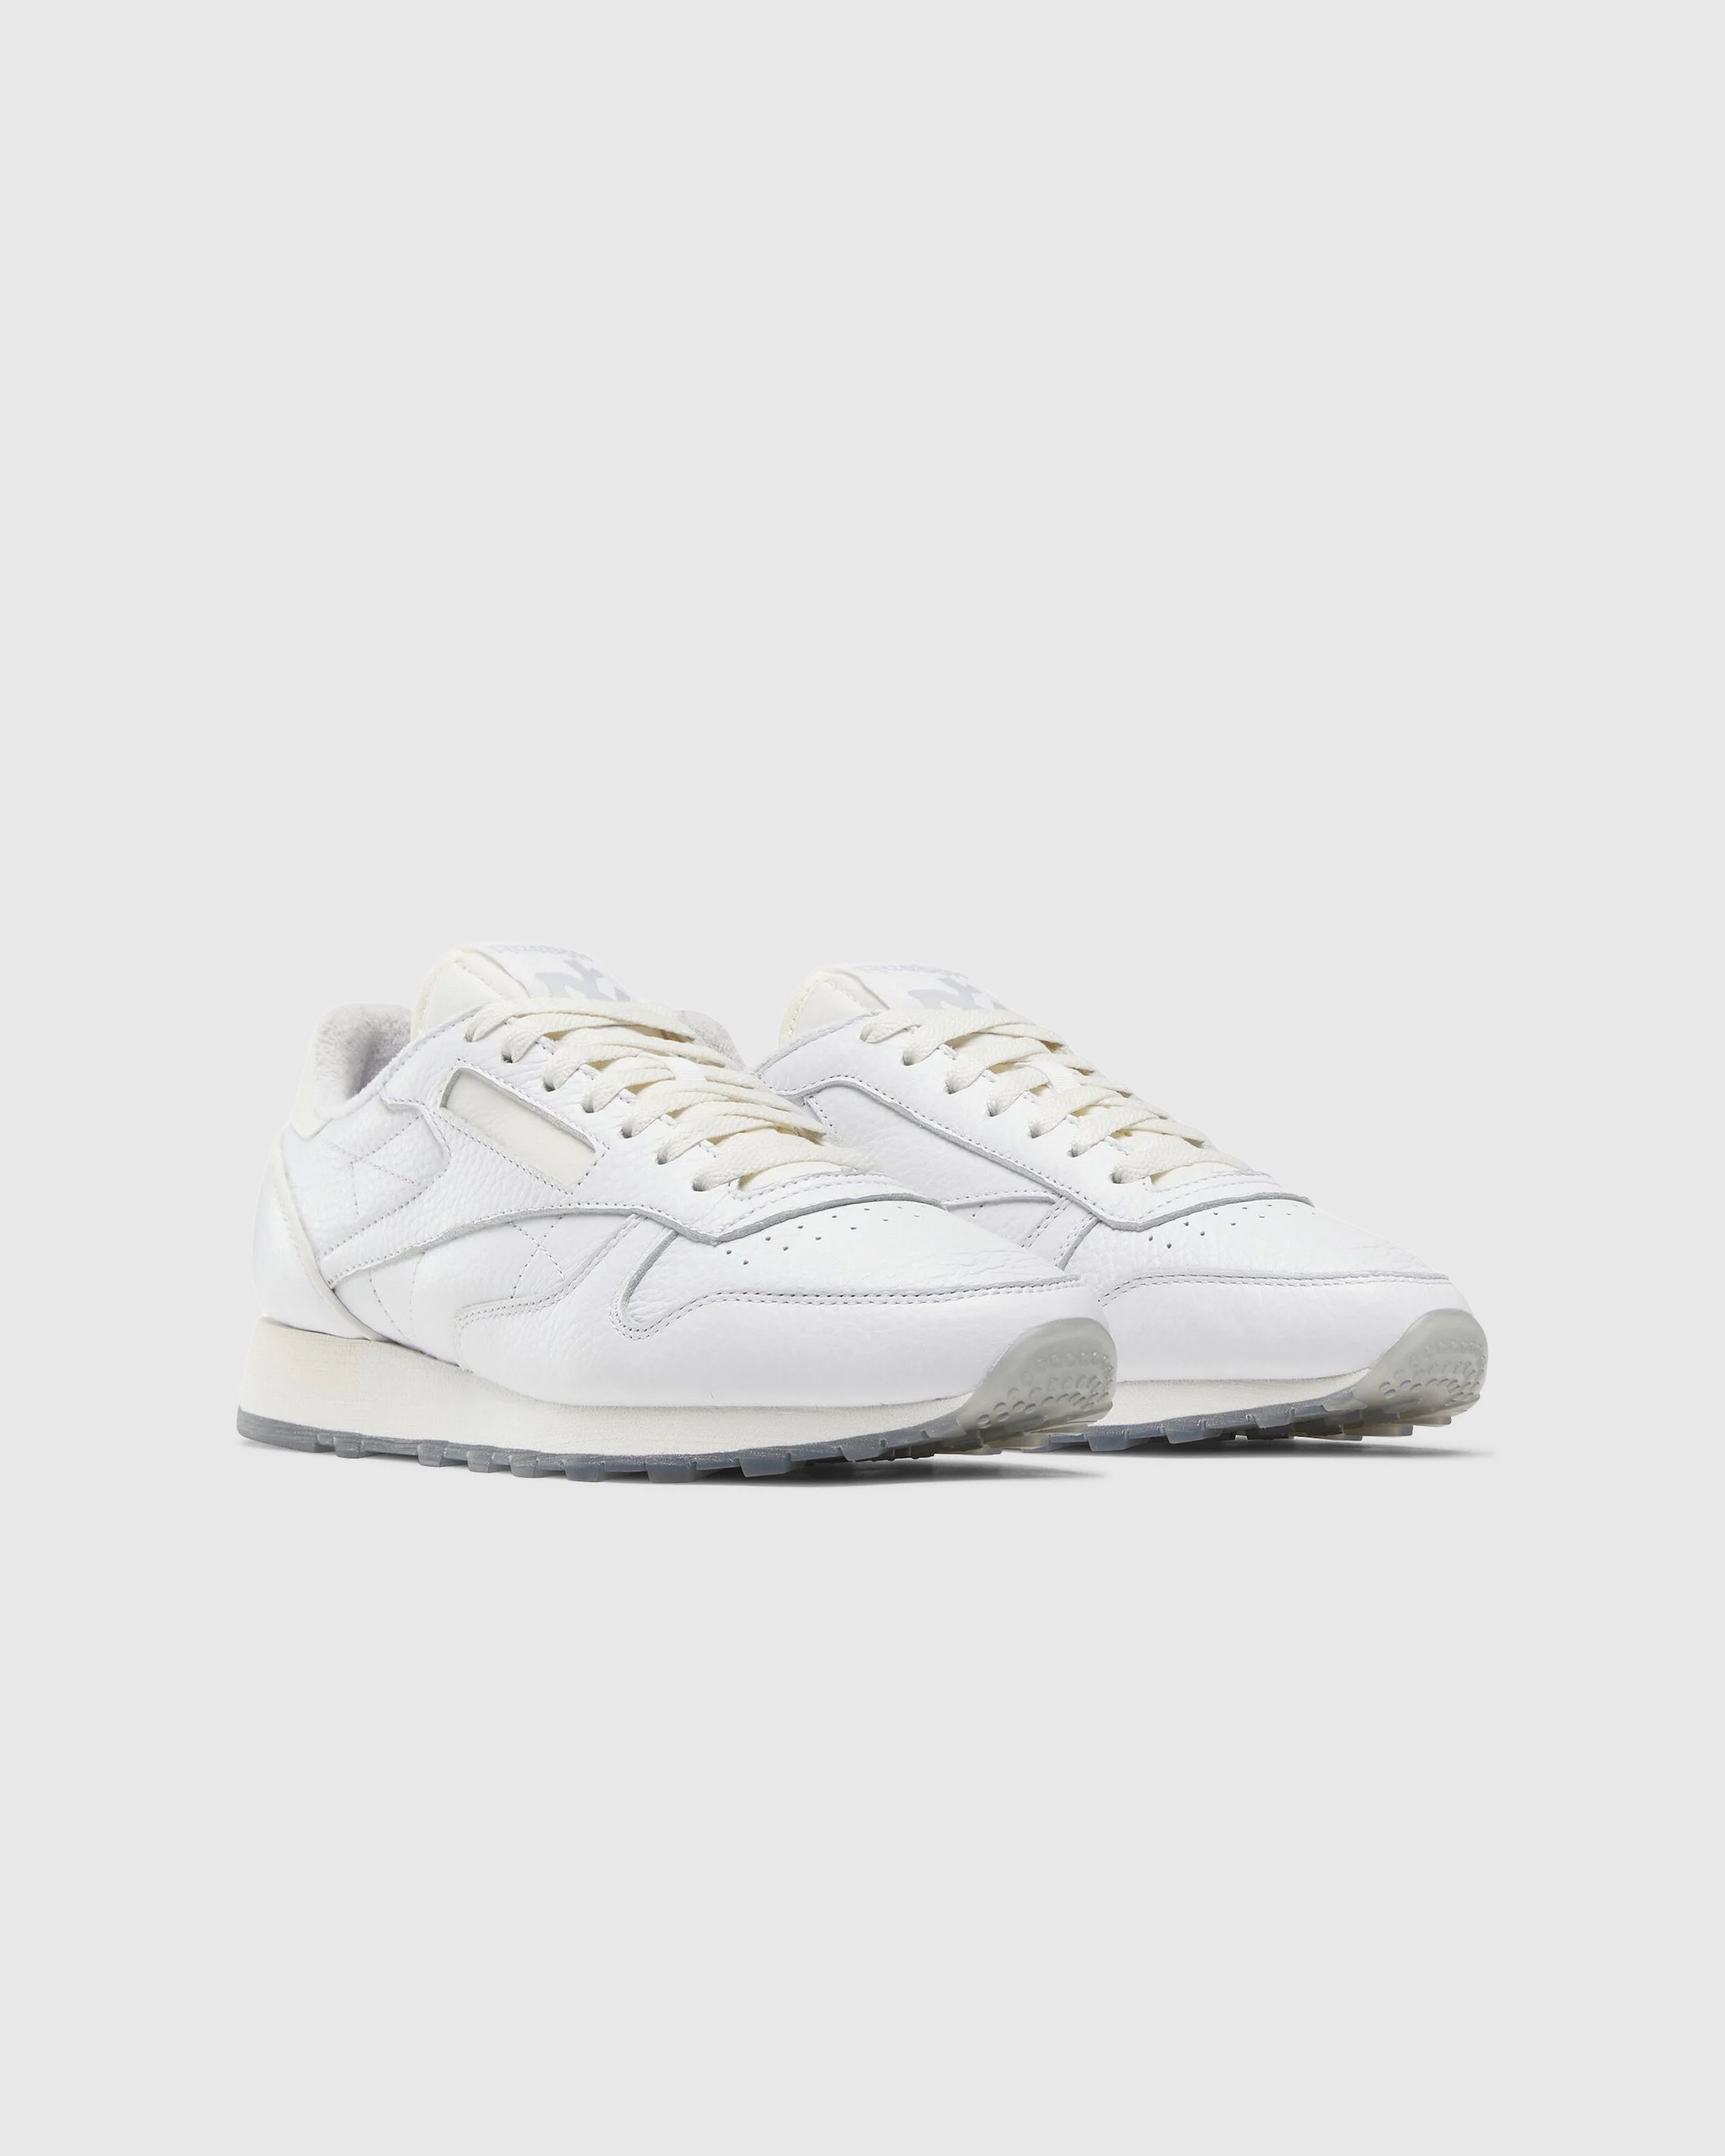 Reebok x Tyrell Winston - Classic Leather ftwr white/chalk/cold grey 2 - Footwear - White - Image 2